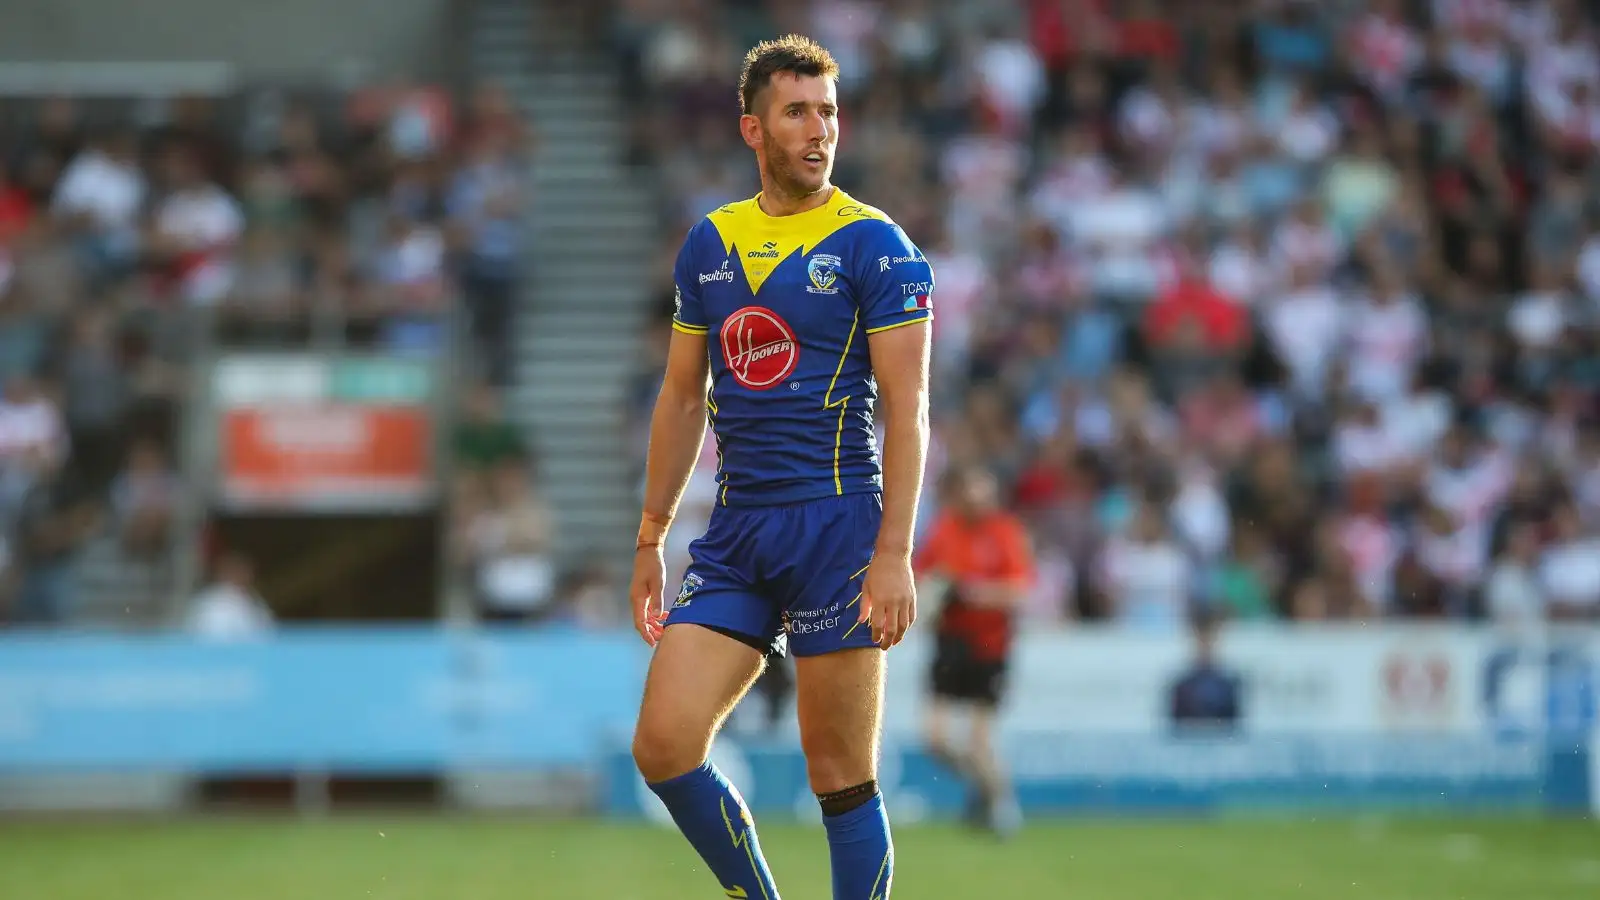 Warrington Wolves dealt Stefan Ratchford injury blow with approximate recovery timeframe given